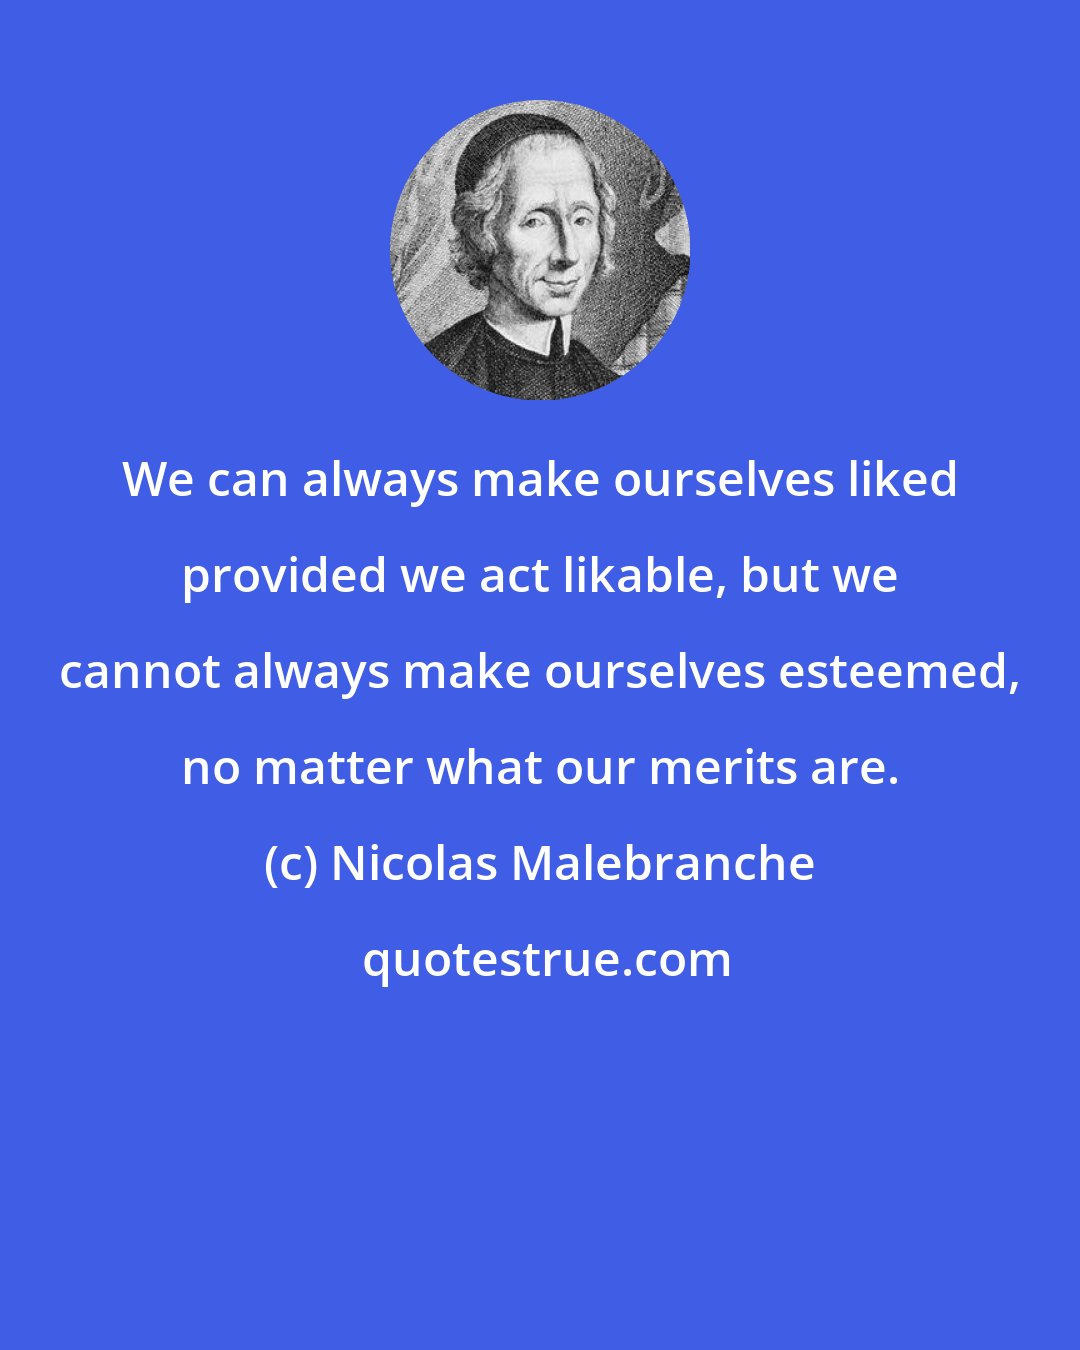 Nicolas Malebranche: We can always make ourselves liked provided we act likable, but we cannot always make ourselves esteemed, no matter what our merits are.